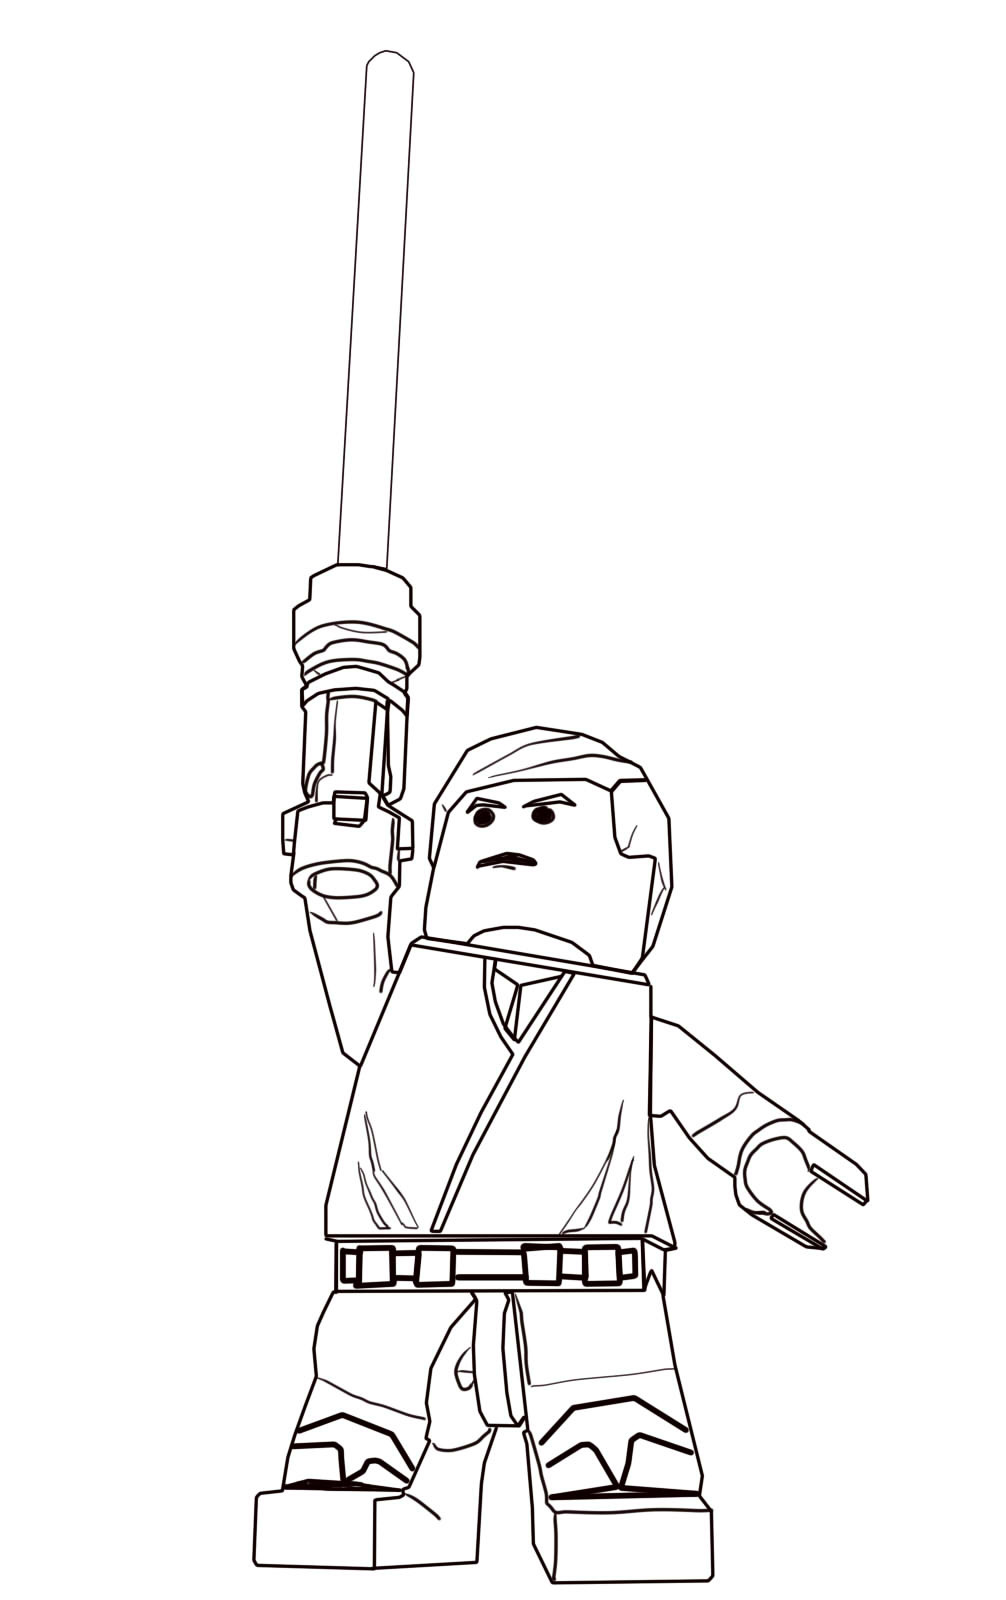 LEGO coloring pages with characters: Chima, Ninjago, City, Star Wars